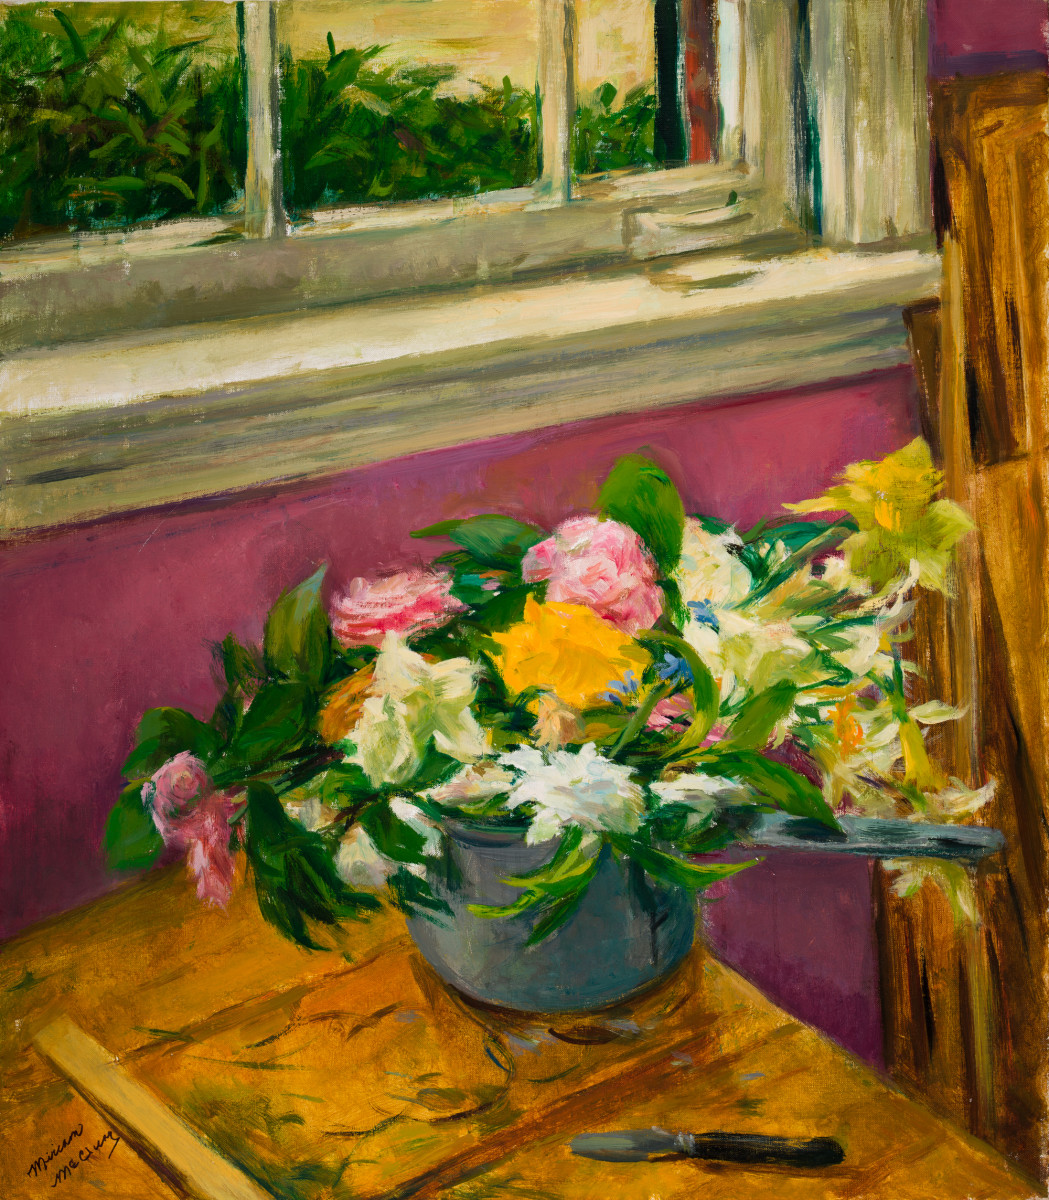 Roses by the Window by Miriam McClung 